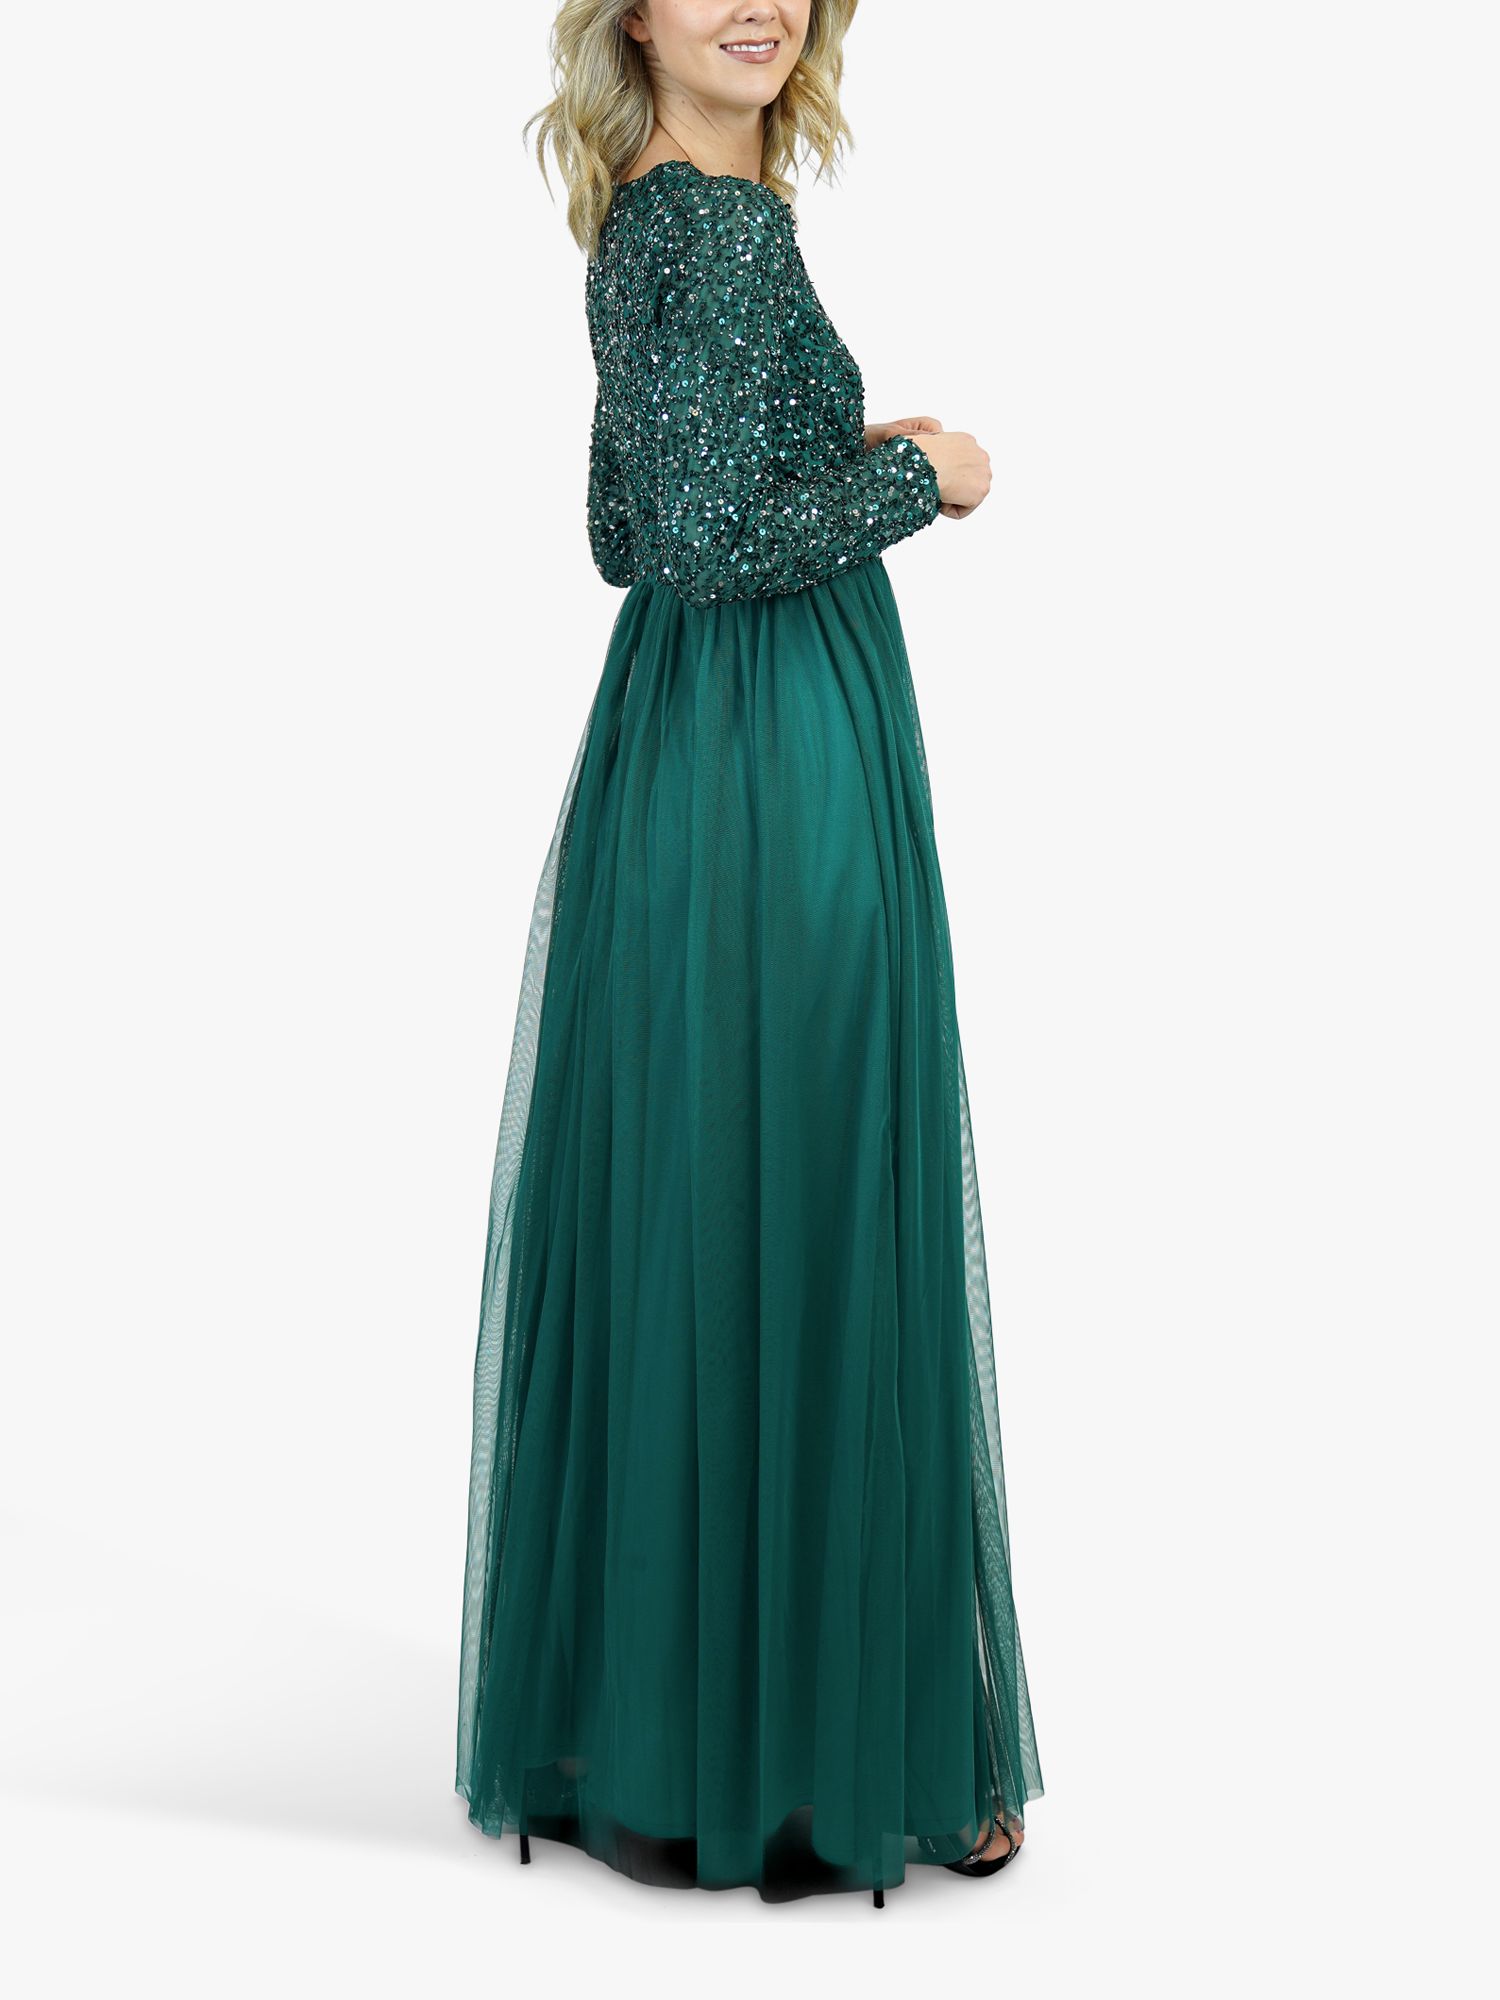 Buy Lace & Beads Belle Sequin Bodice Maxi Dress, Emerald Green Online at johnlewis.com